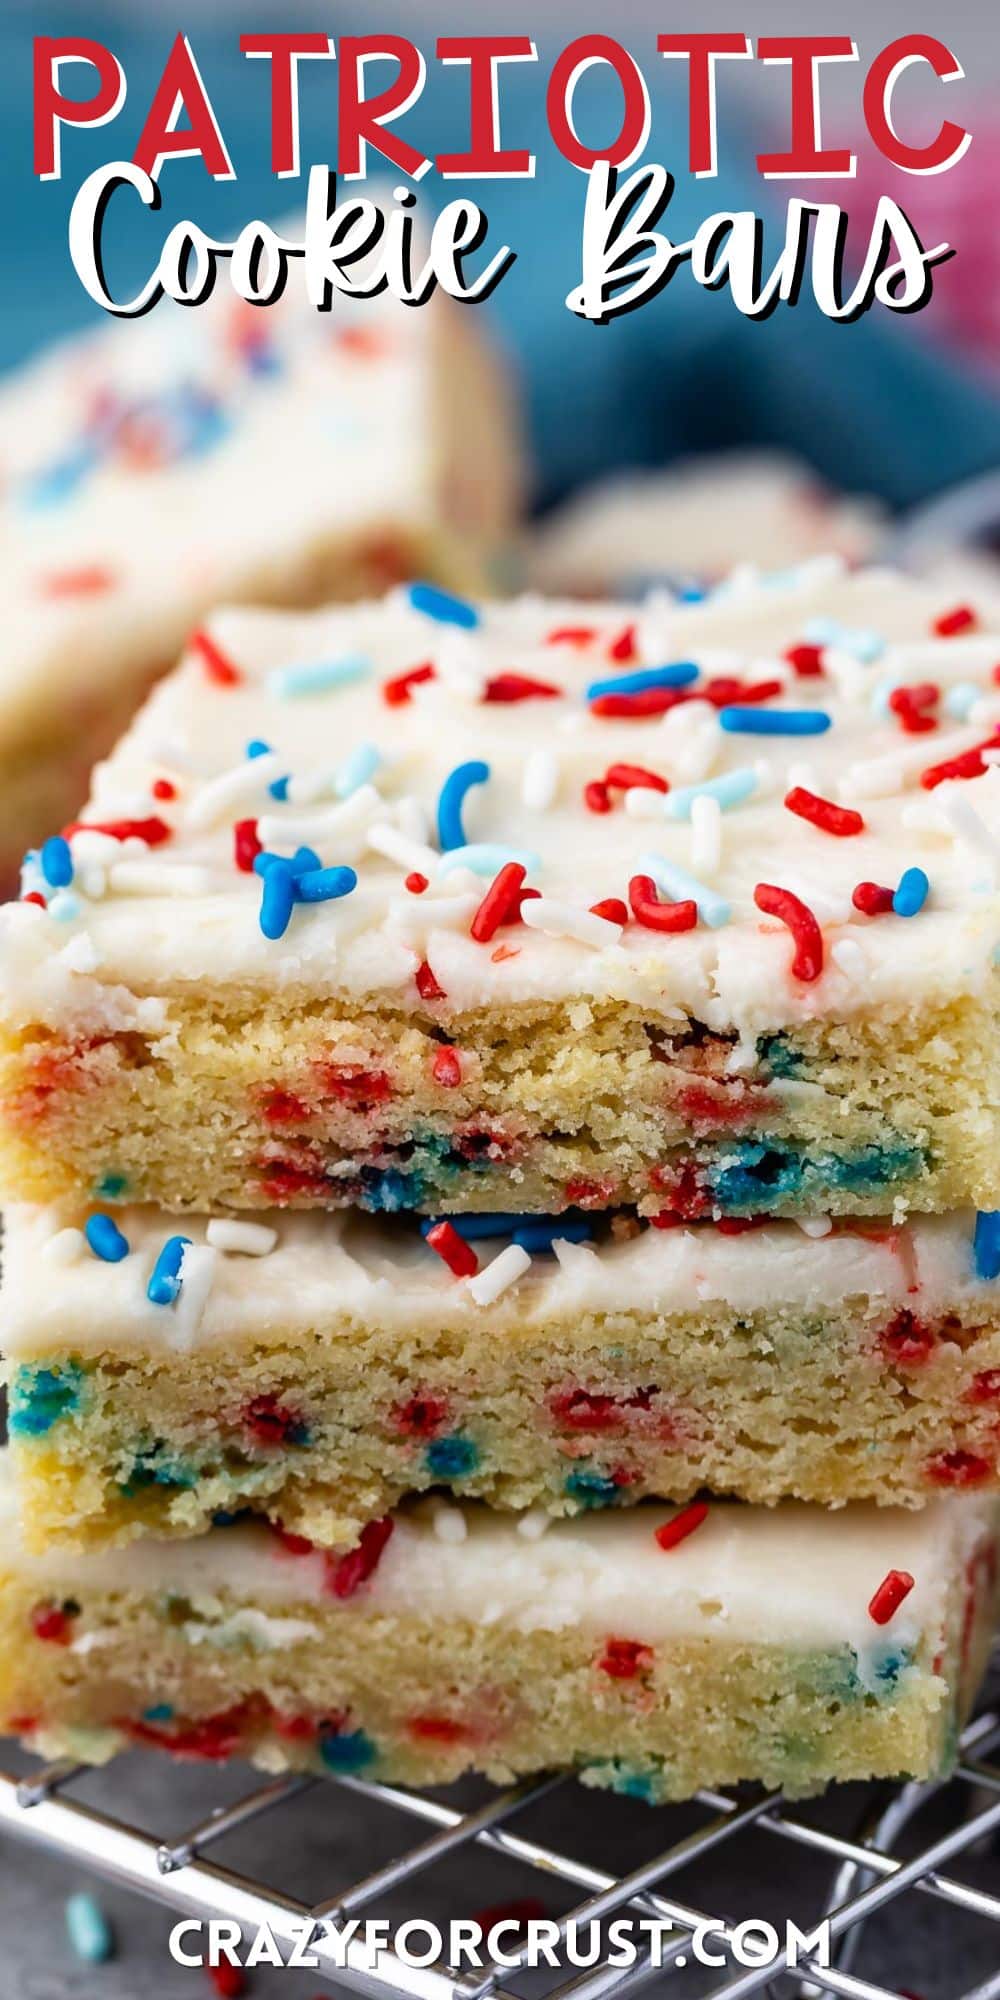 stacked sugar cookie bars with vanilla frosting and red white and blue sprinkles on top with words on the image.